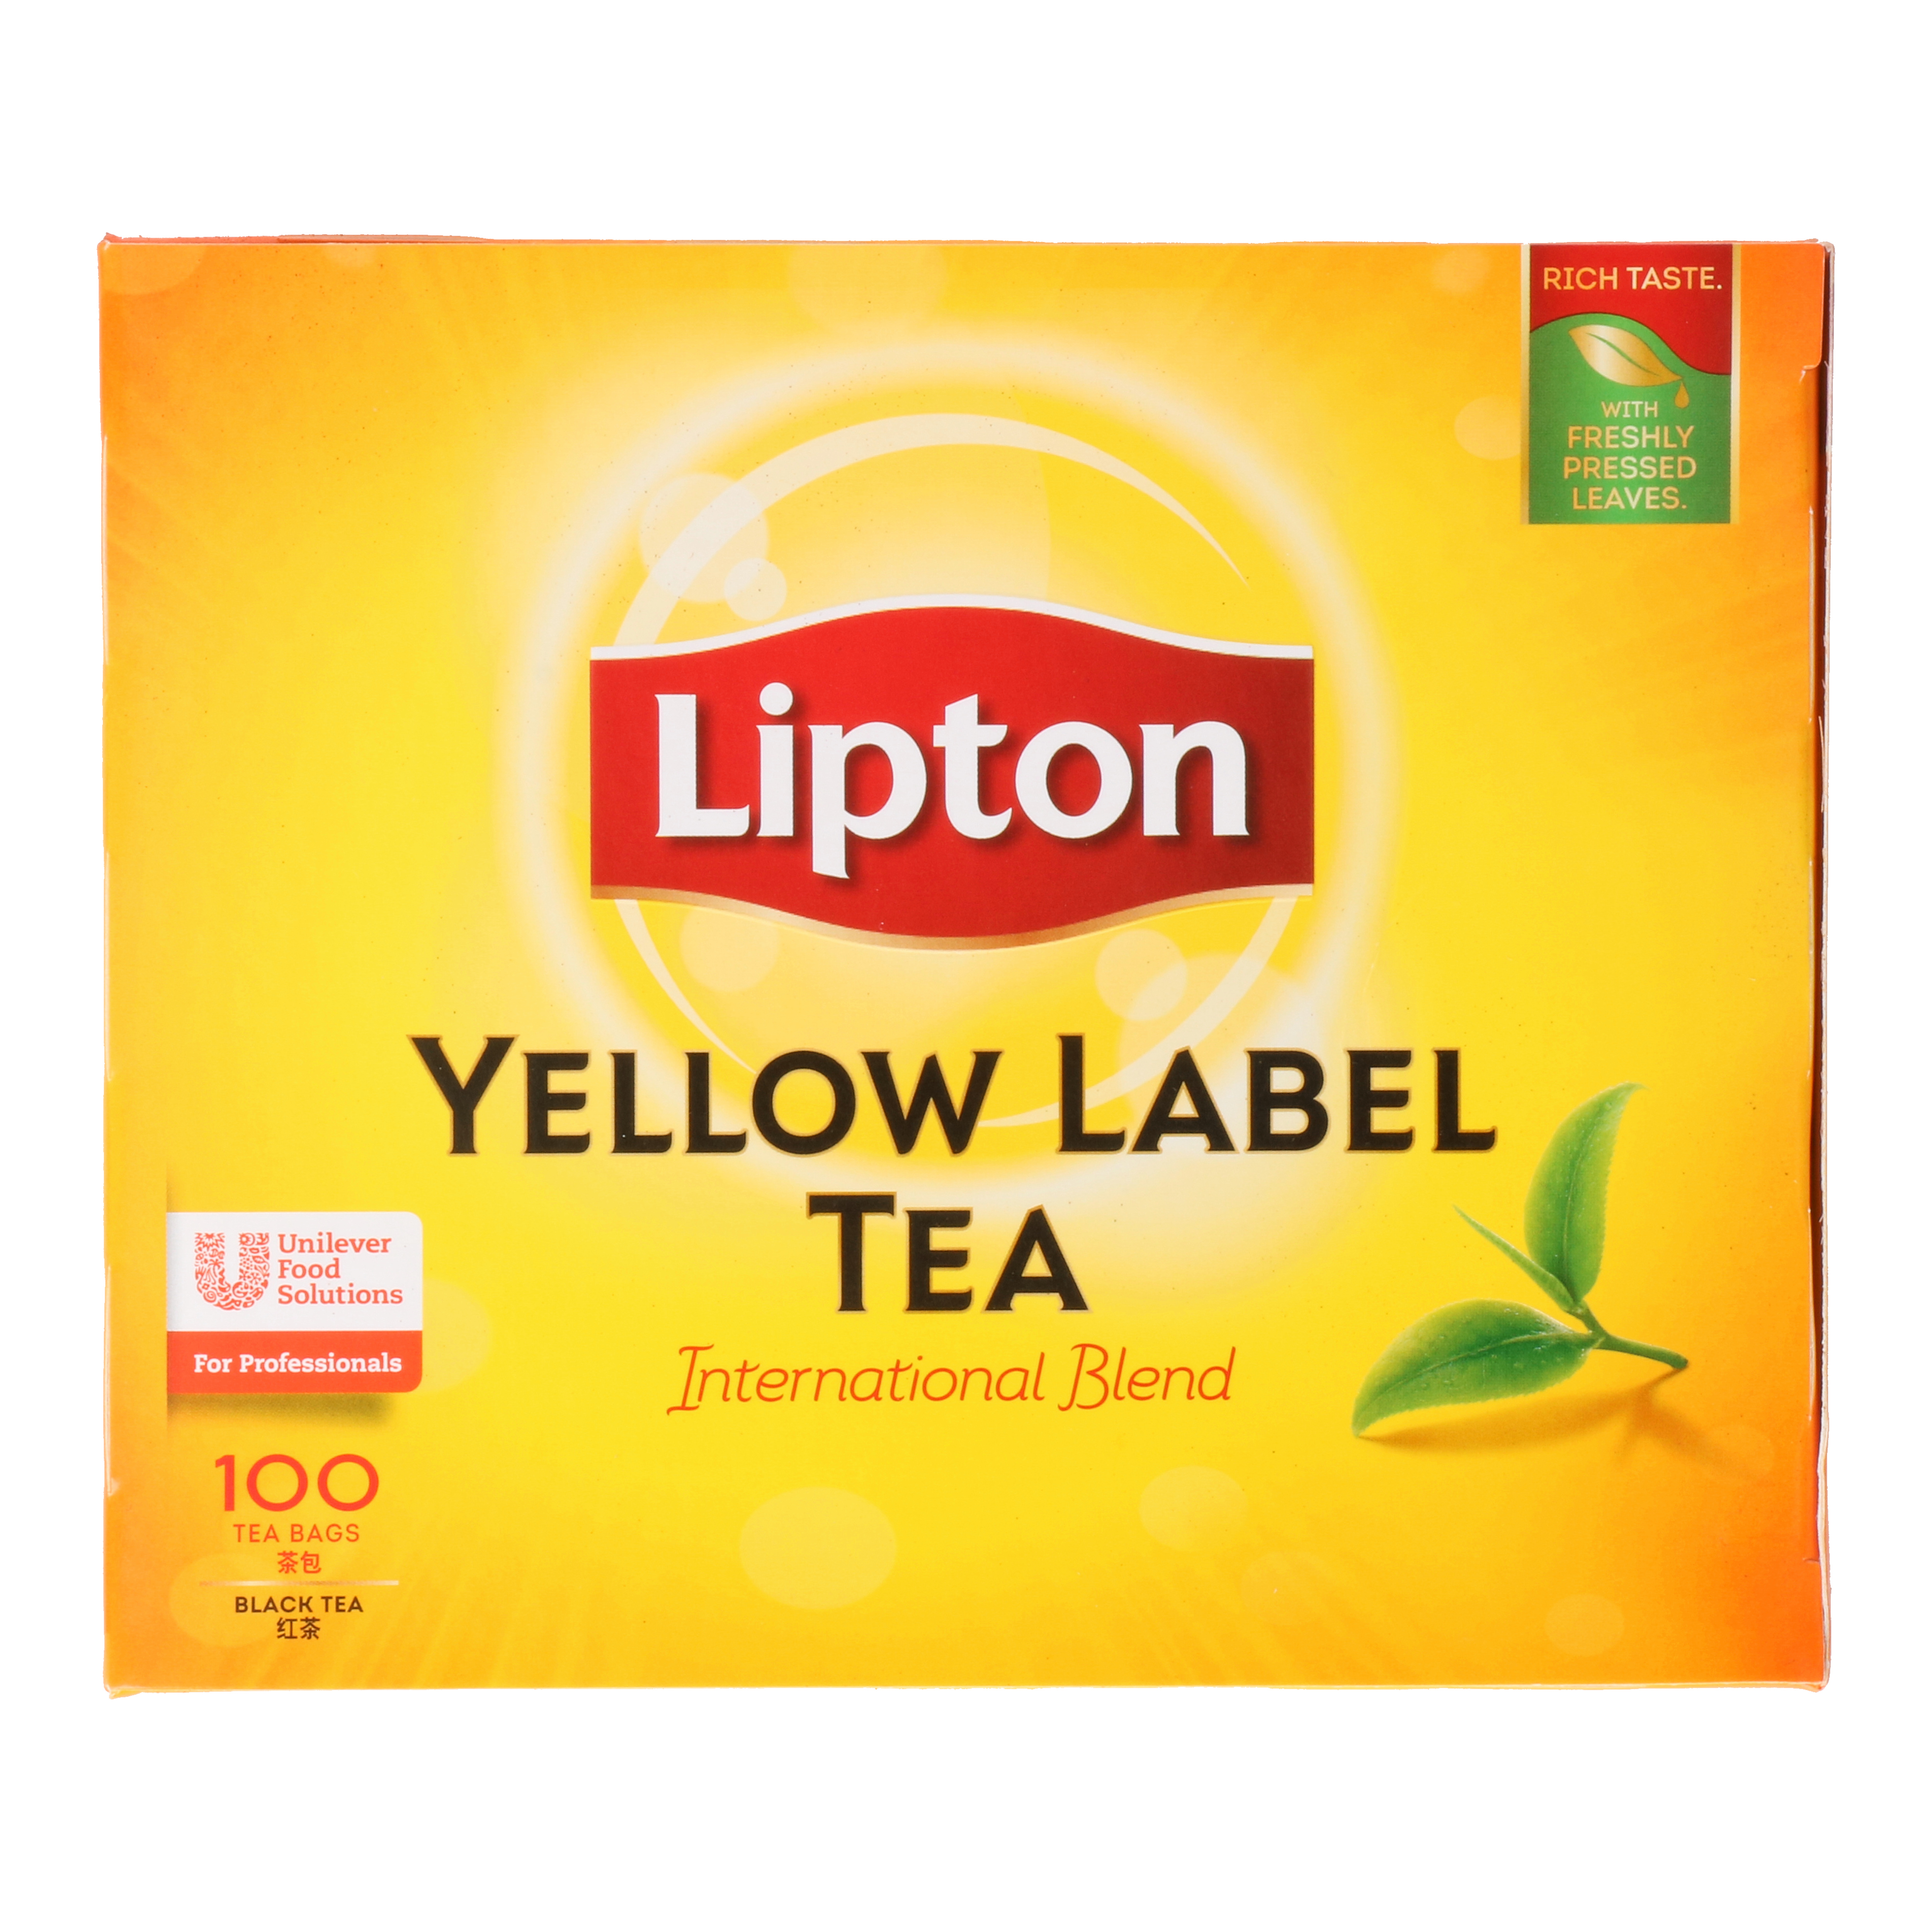 YELLOW LABEL CATERING TEABAG [100'S] (67489522)